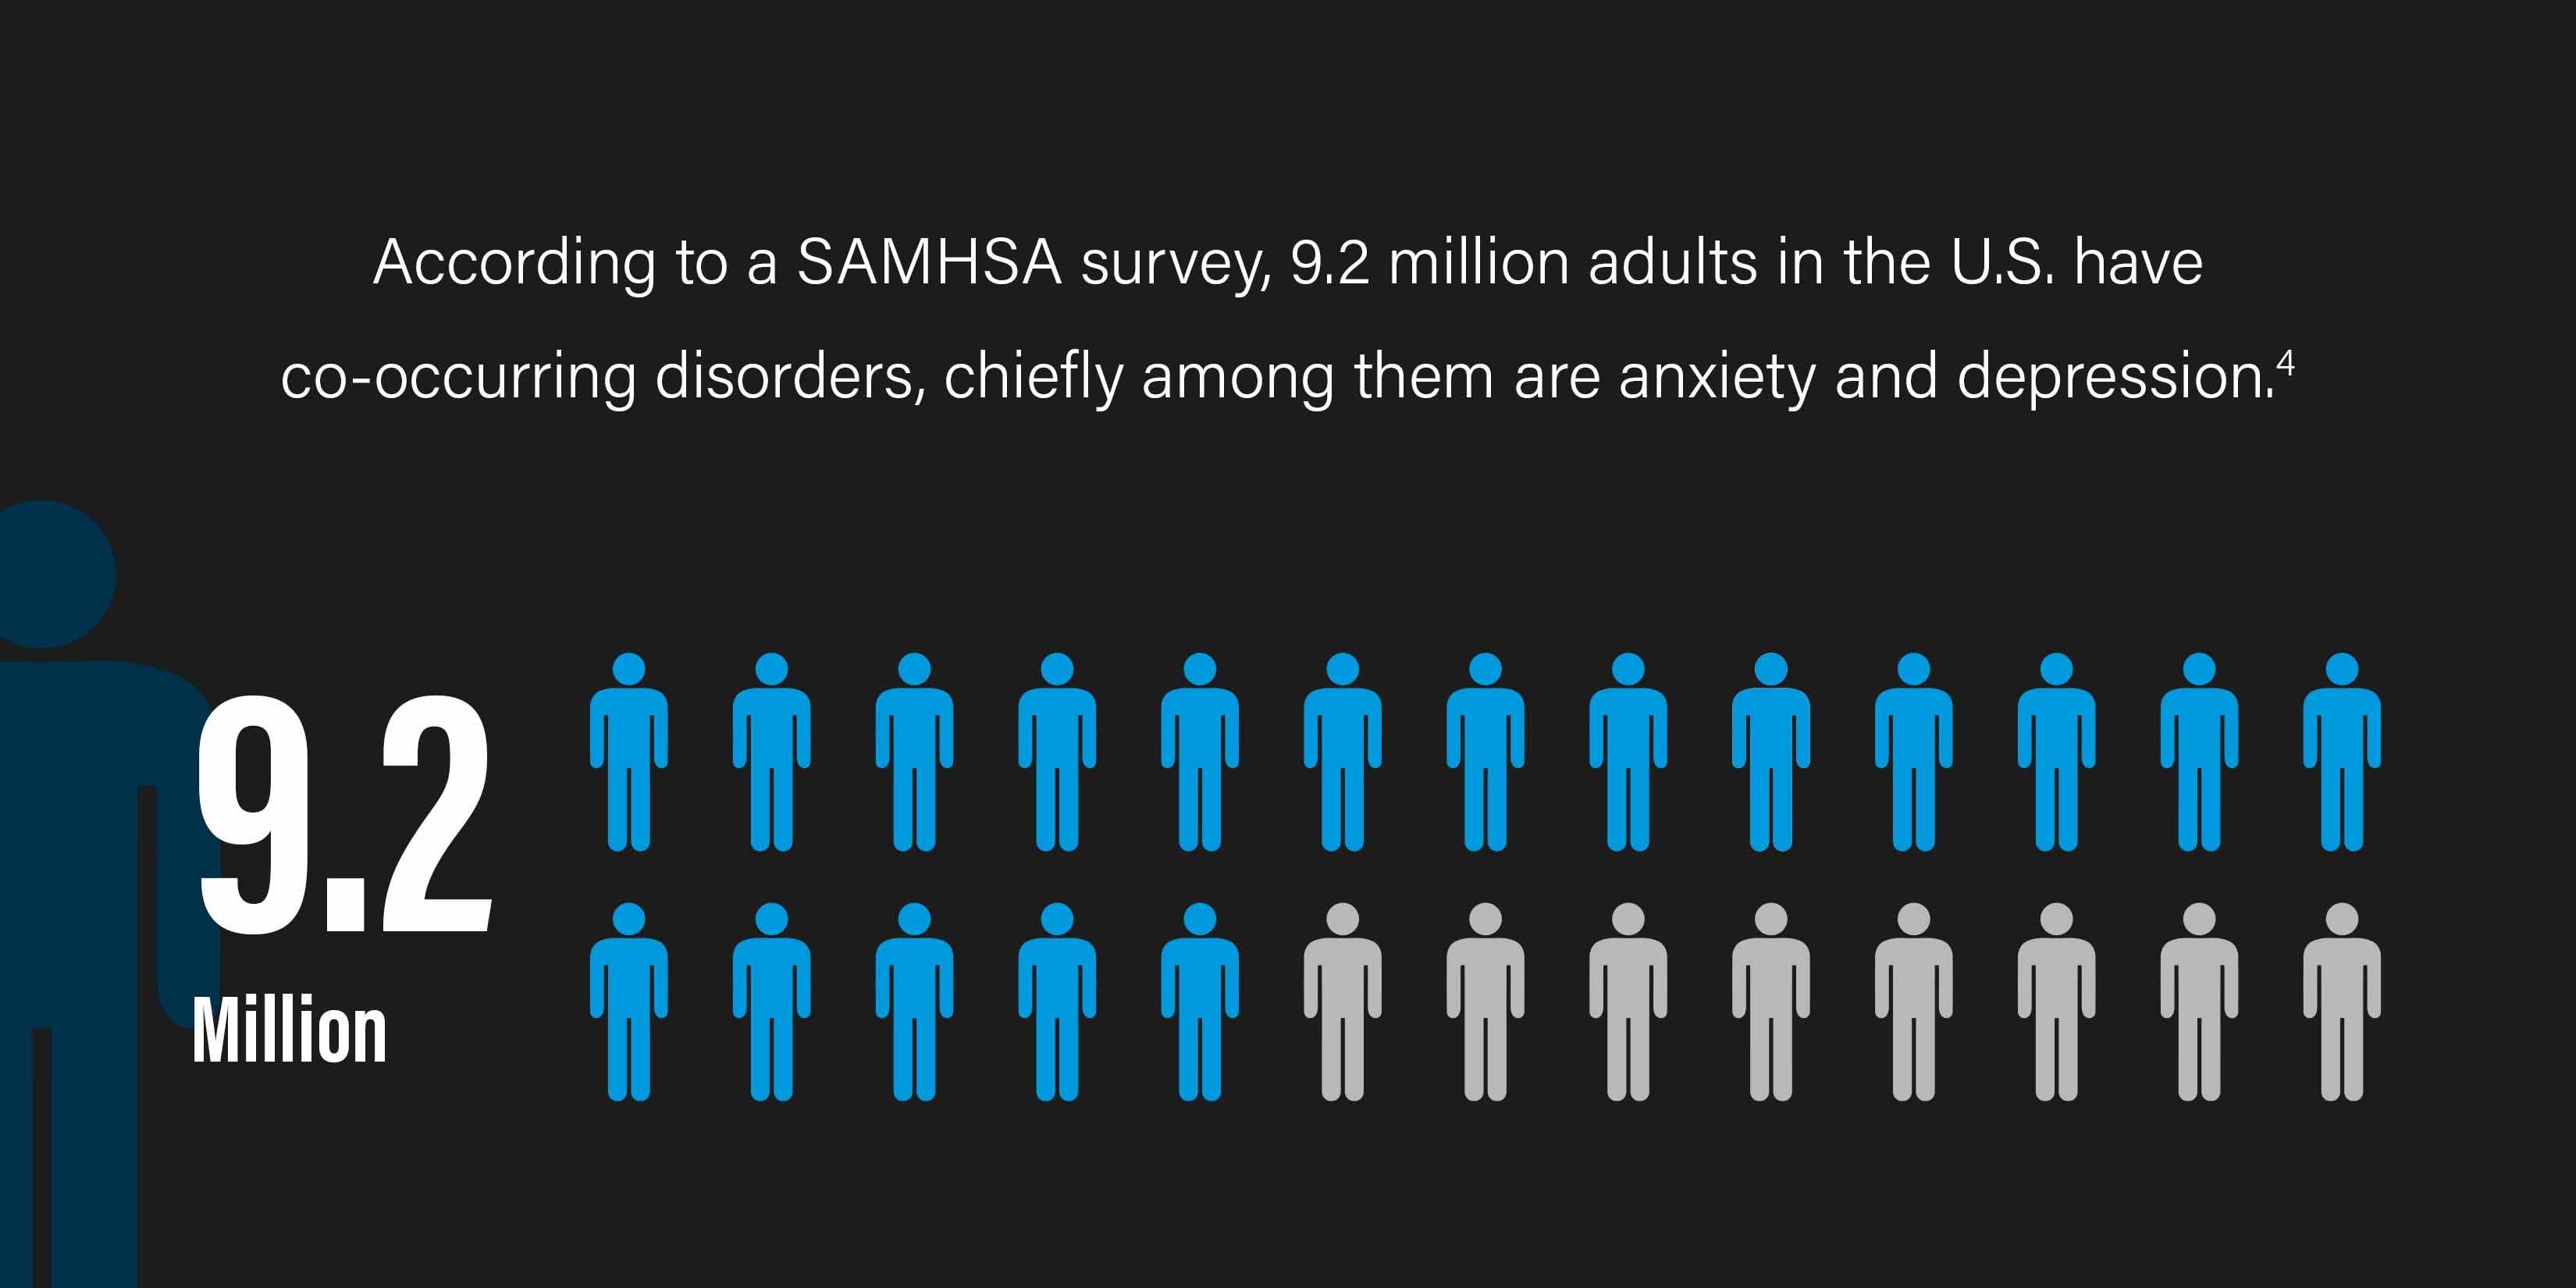 According to a SAMHSA survey, 9.2 million adults in the U.S. have co-occurring disorders, chiefly among them are anxiety and depression.[4]